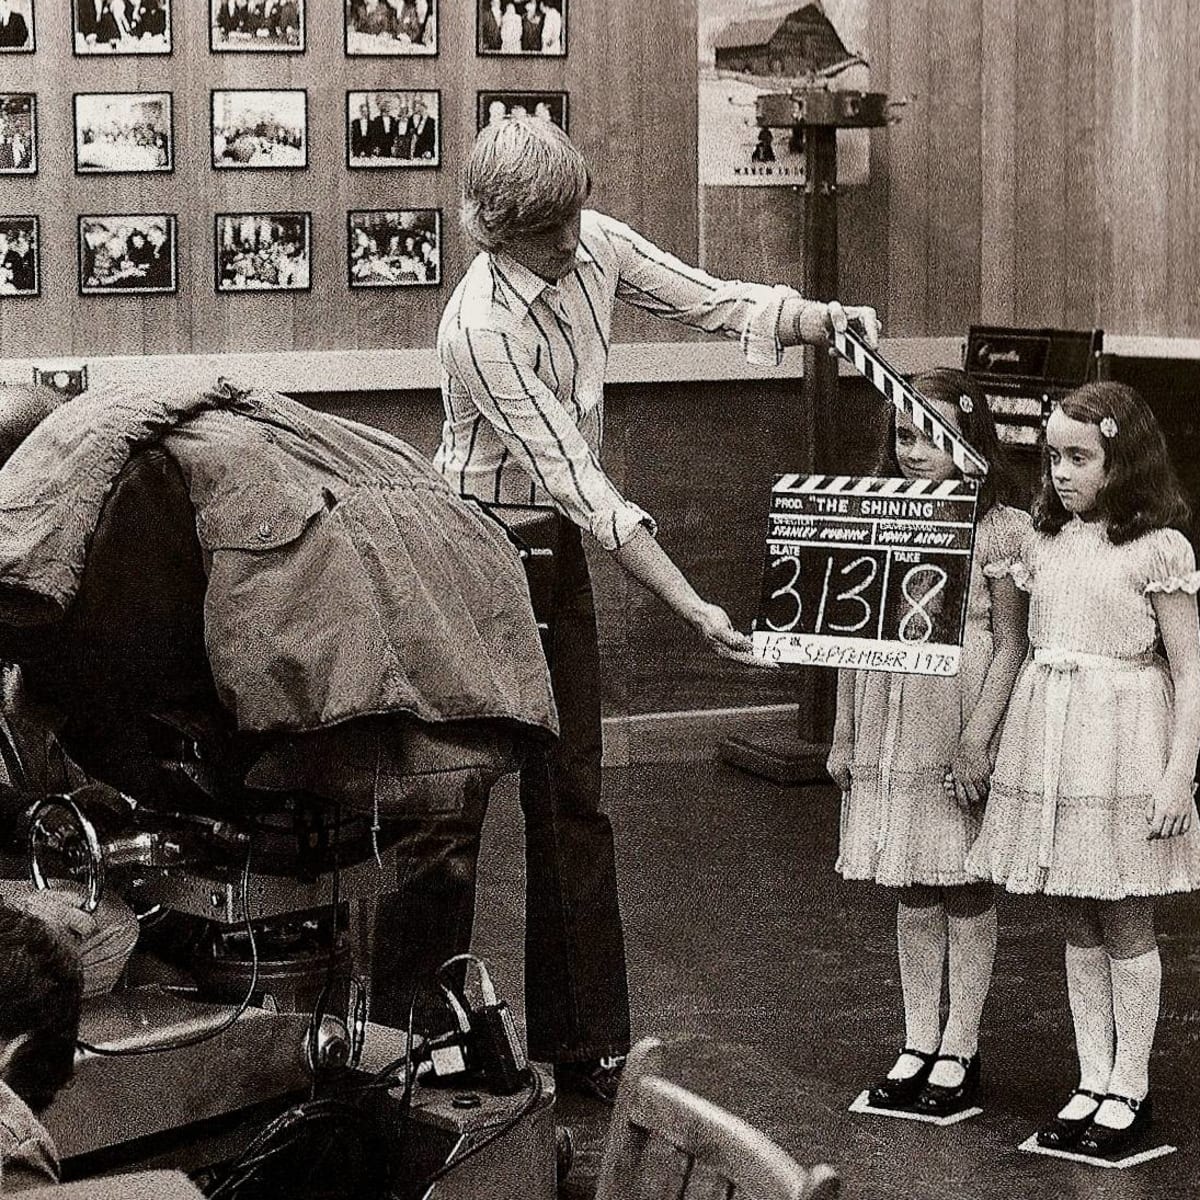 20 facts you might not know about 'The Shining